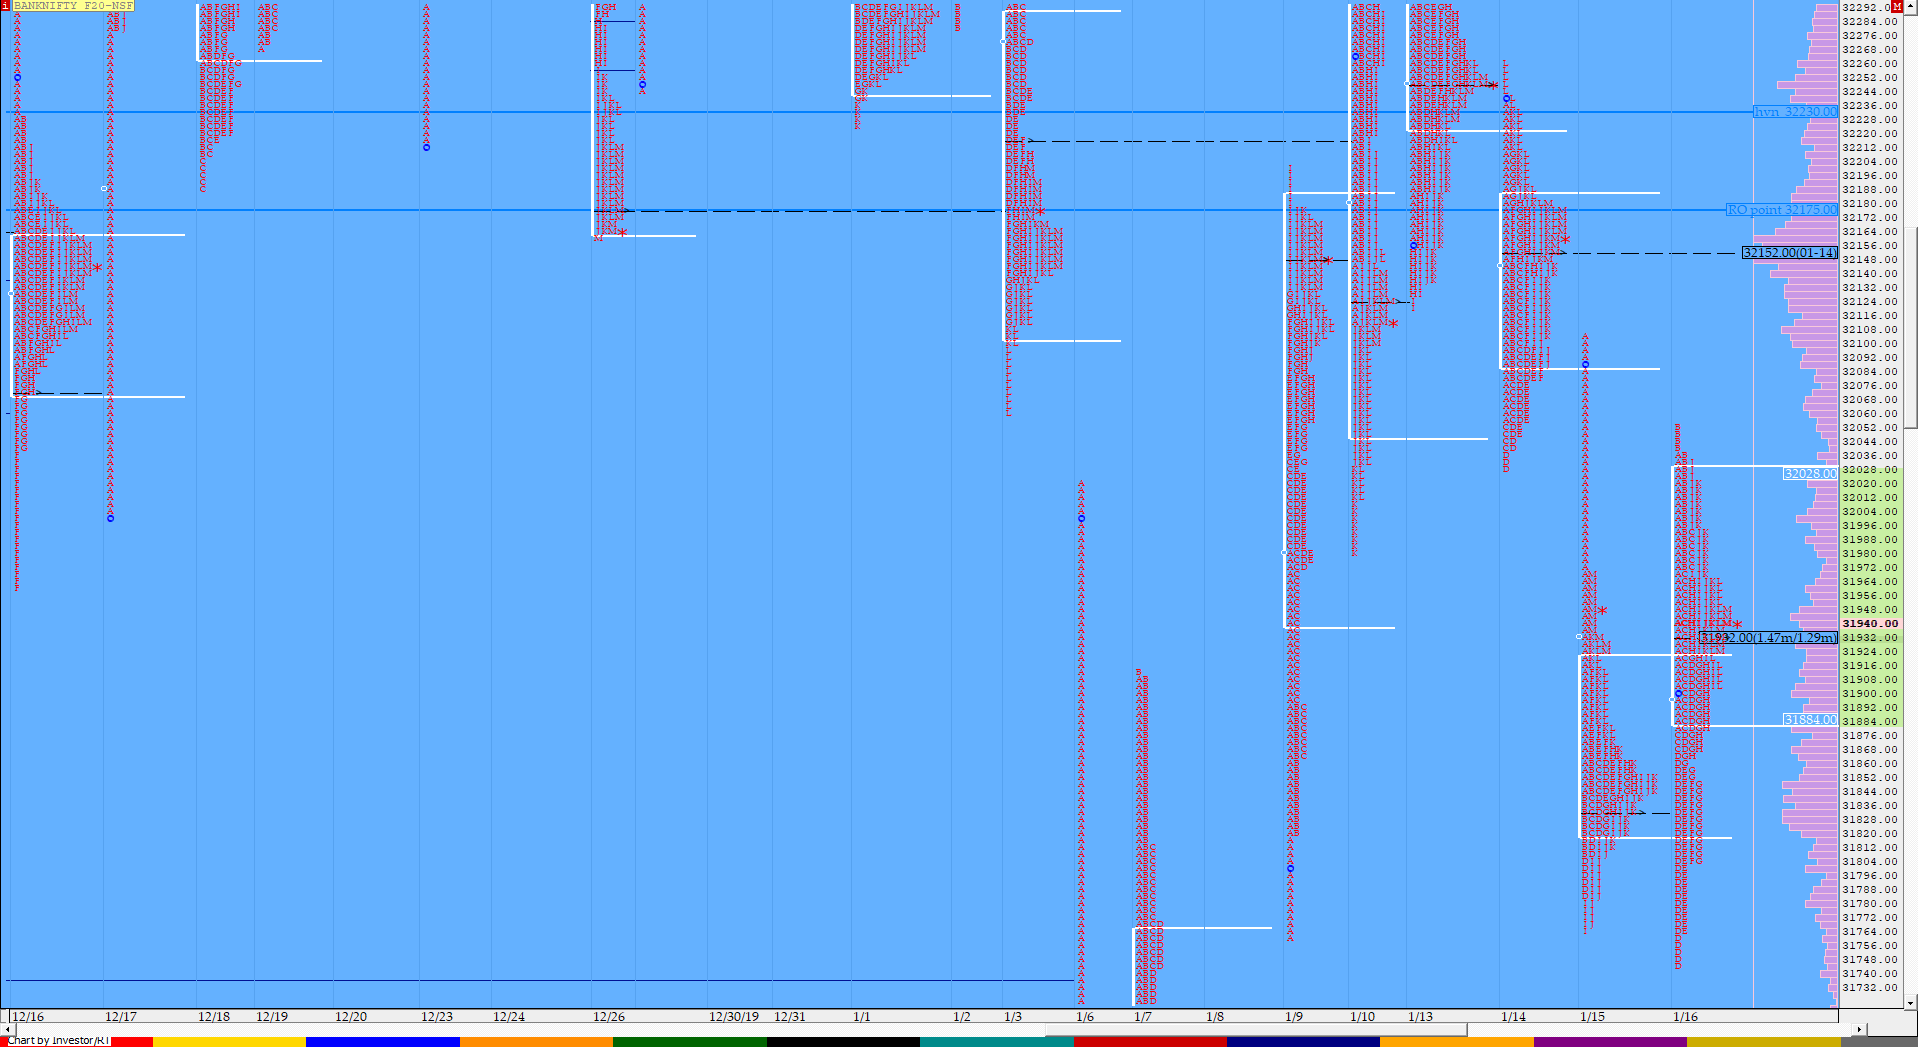 Bnf Compo1 12 Market Profile Analysis Dated 16Th Jan 2020 Banknifty Futures, Charts, Day Trading, Intraday Trading, Intraday Trading Strategies, Market Profile, Market Profile Trading Strategies, Nifty Futures, Order Flow Analysis, Support And Resistance, Technical Analysis, Trading Strategies, Volume Profile Trading